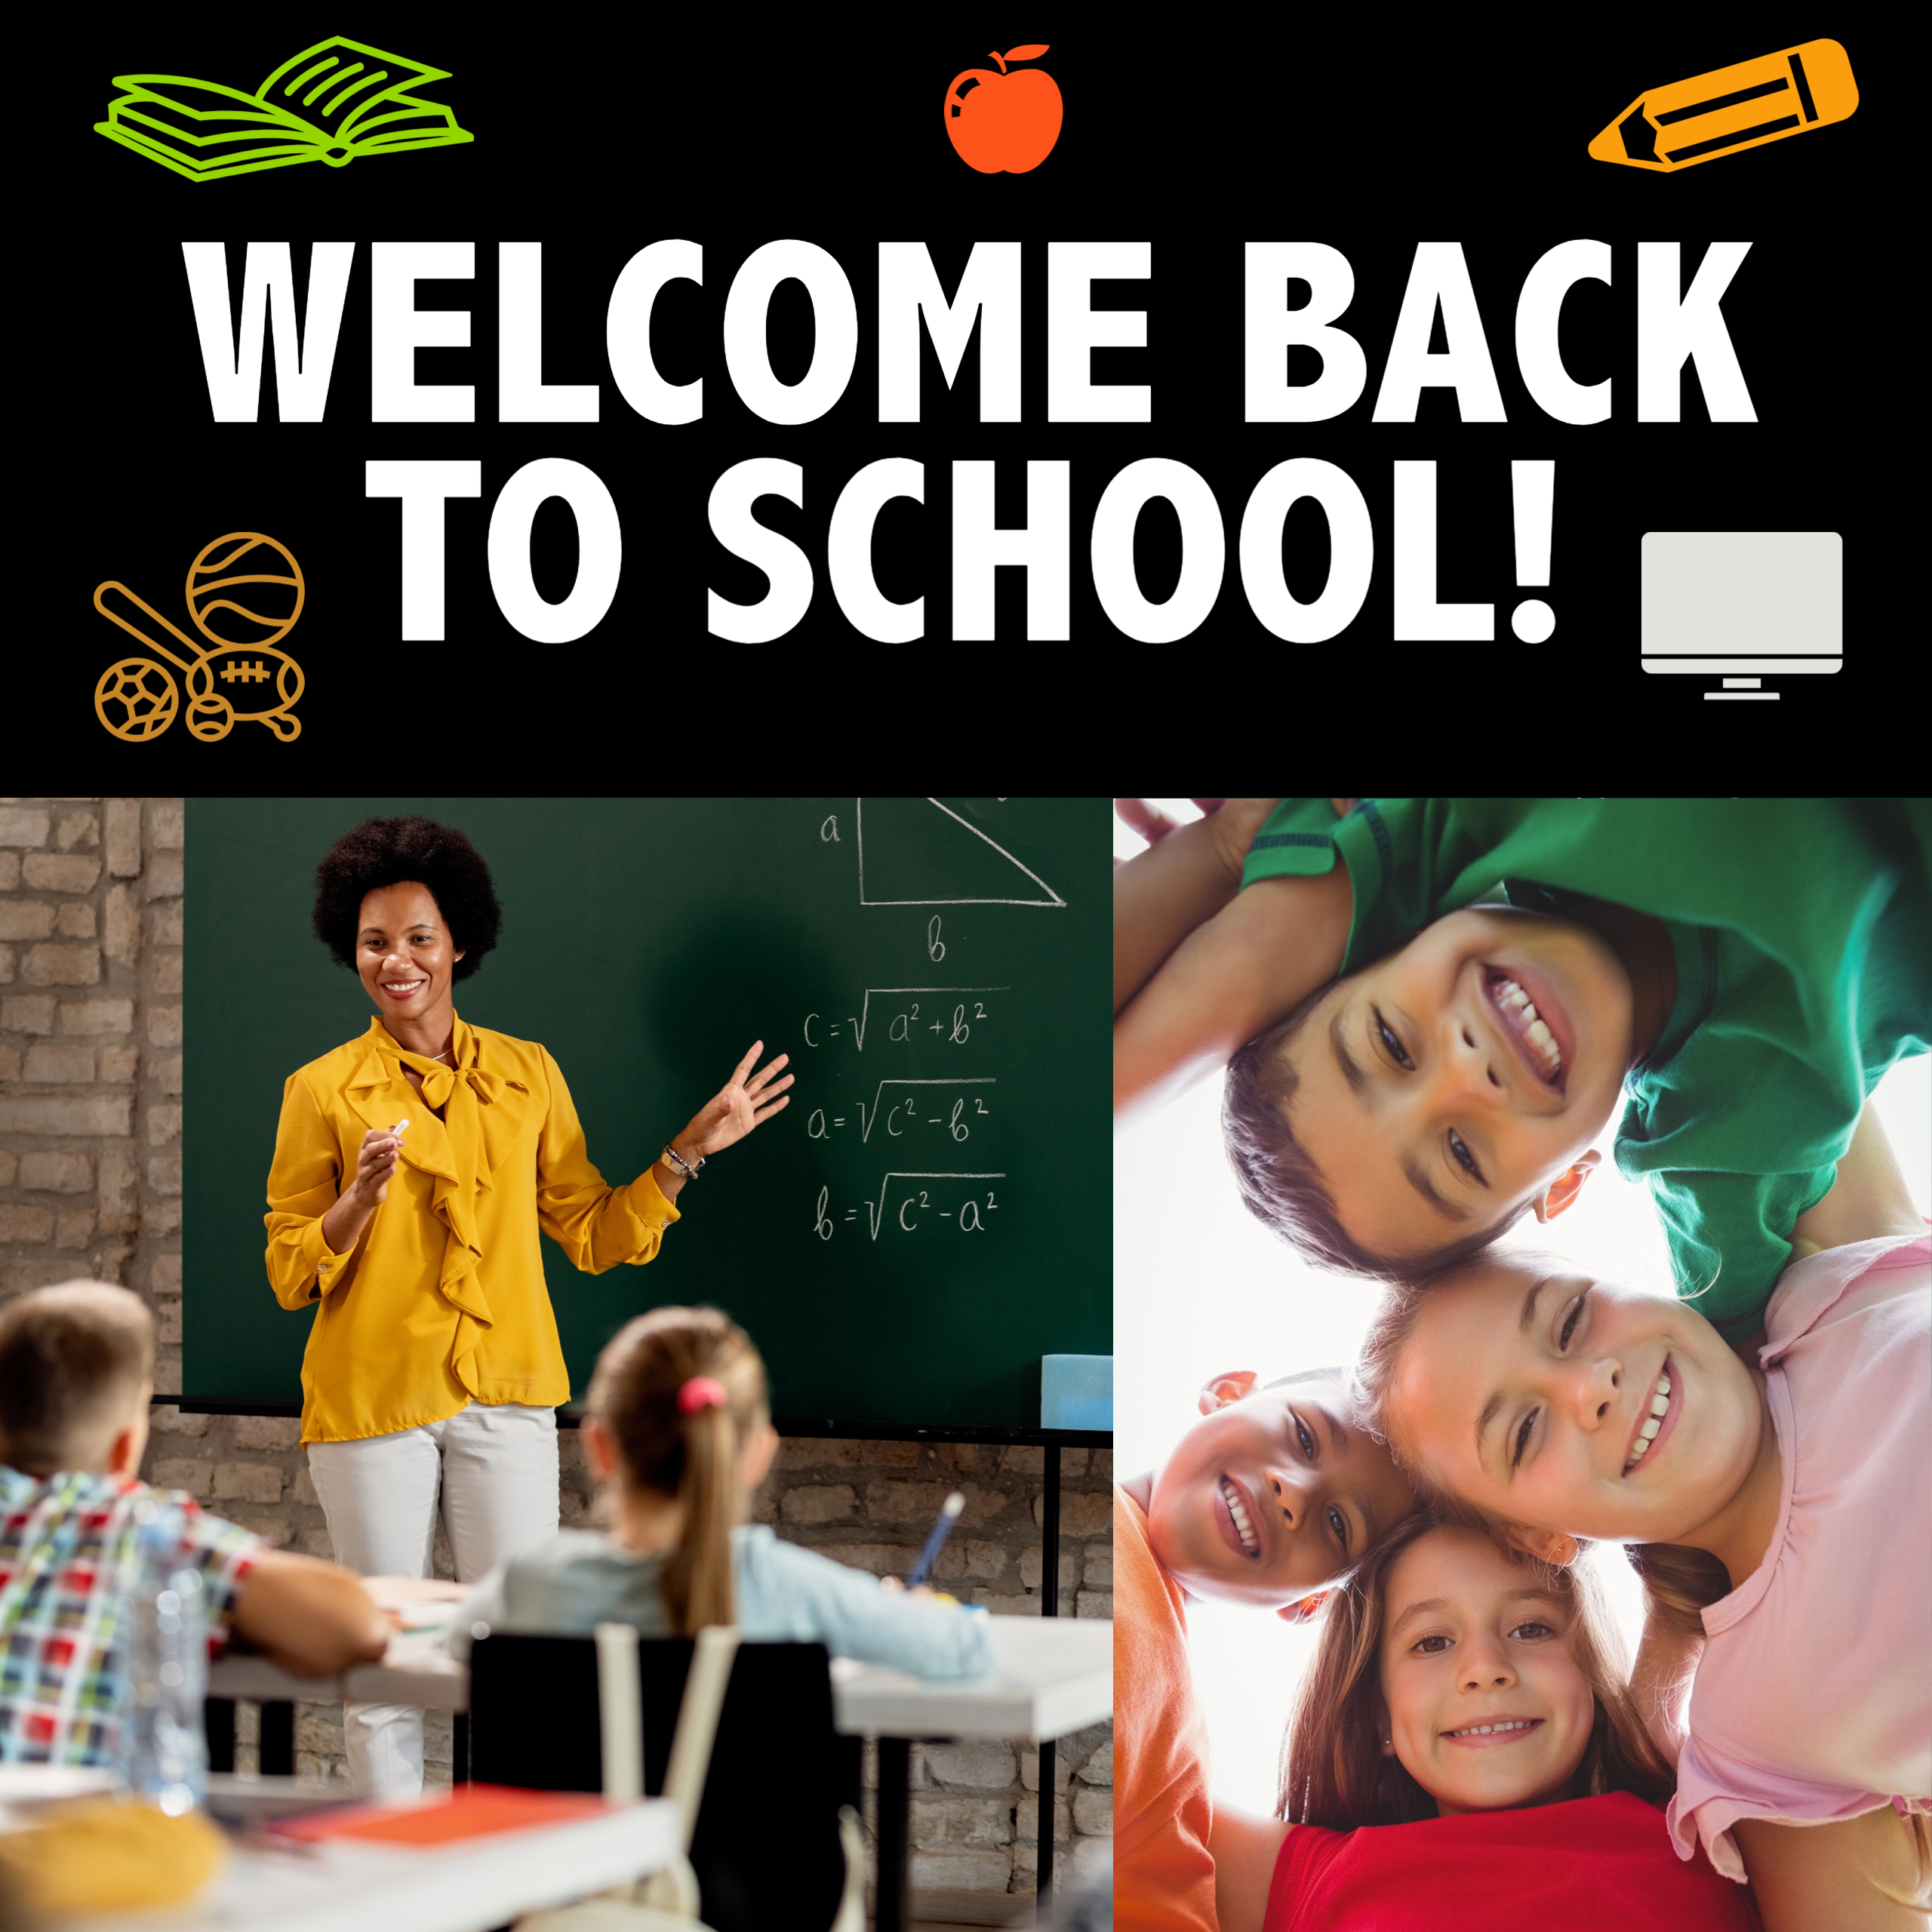 Welcome back to school teachers, students and Central Rivers AEA staff!